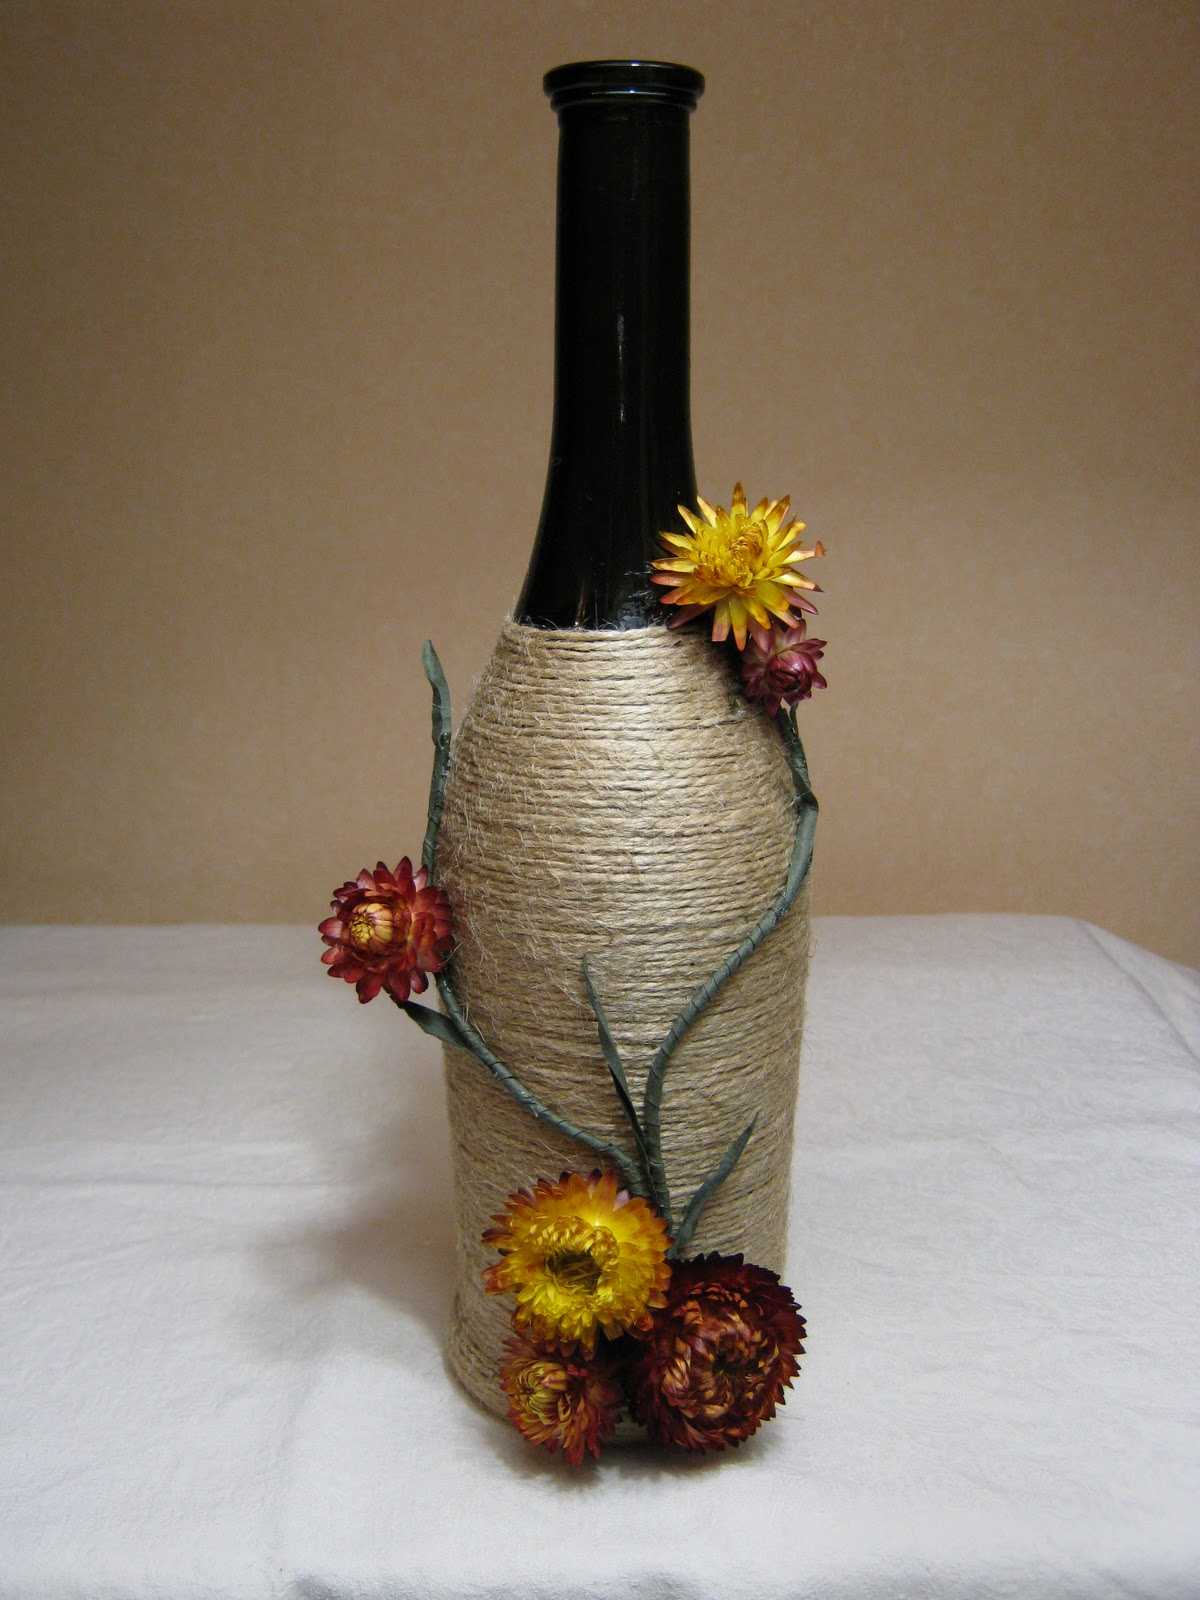 a variant of the original decoration of glass bottles with twine